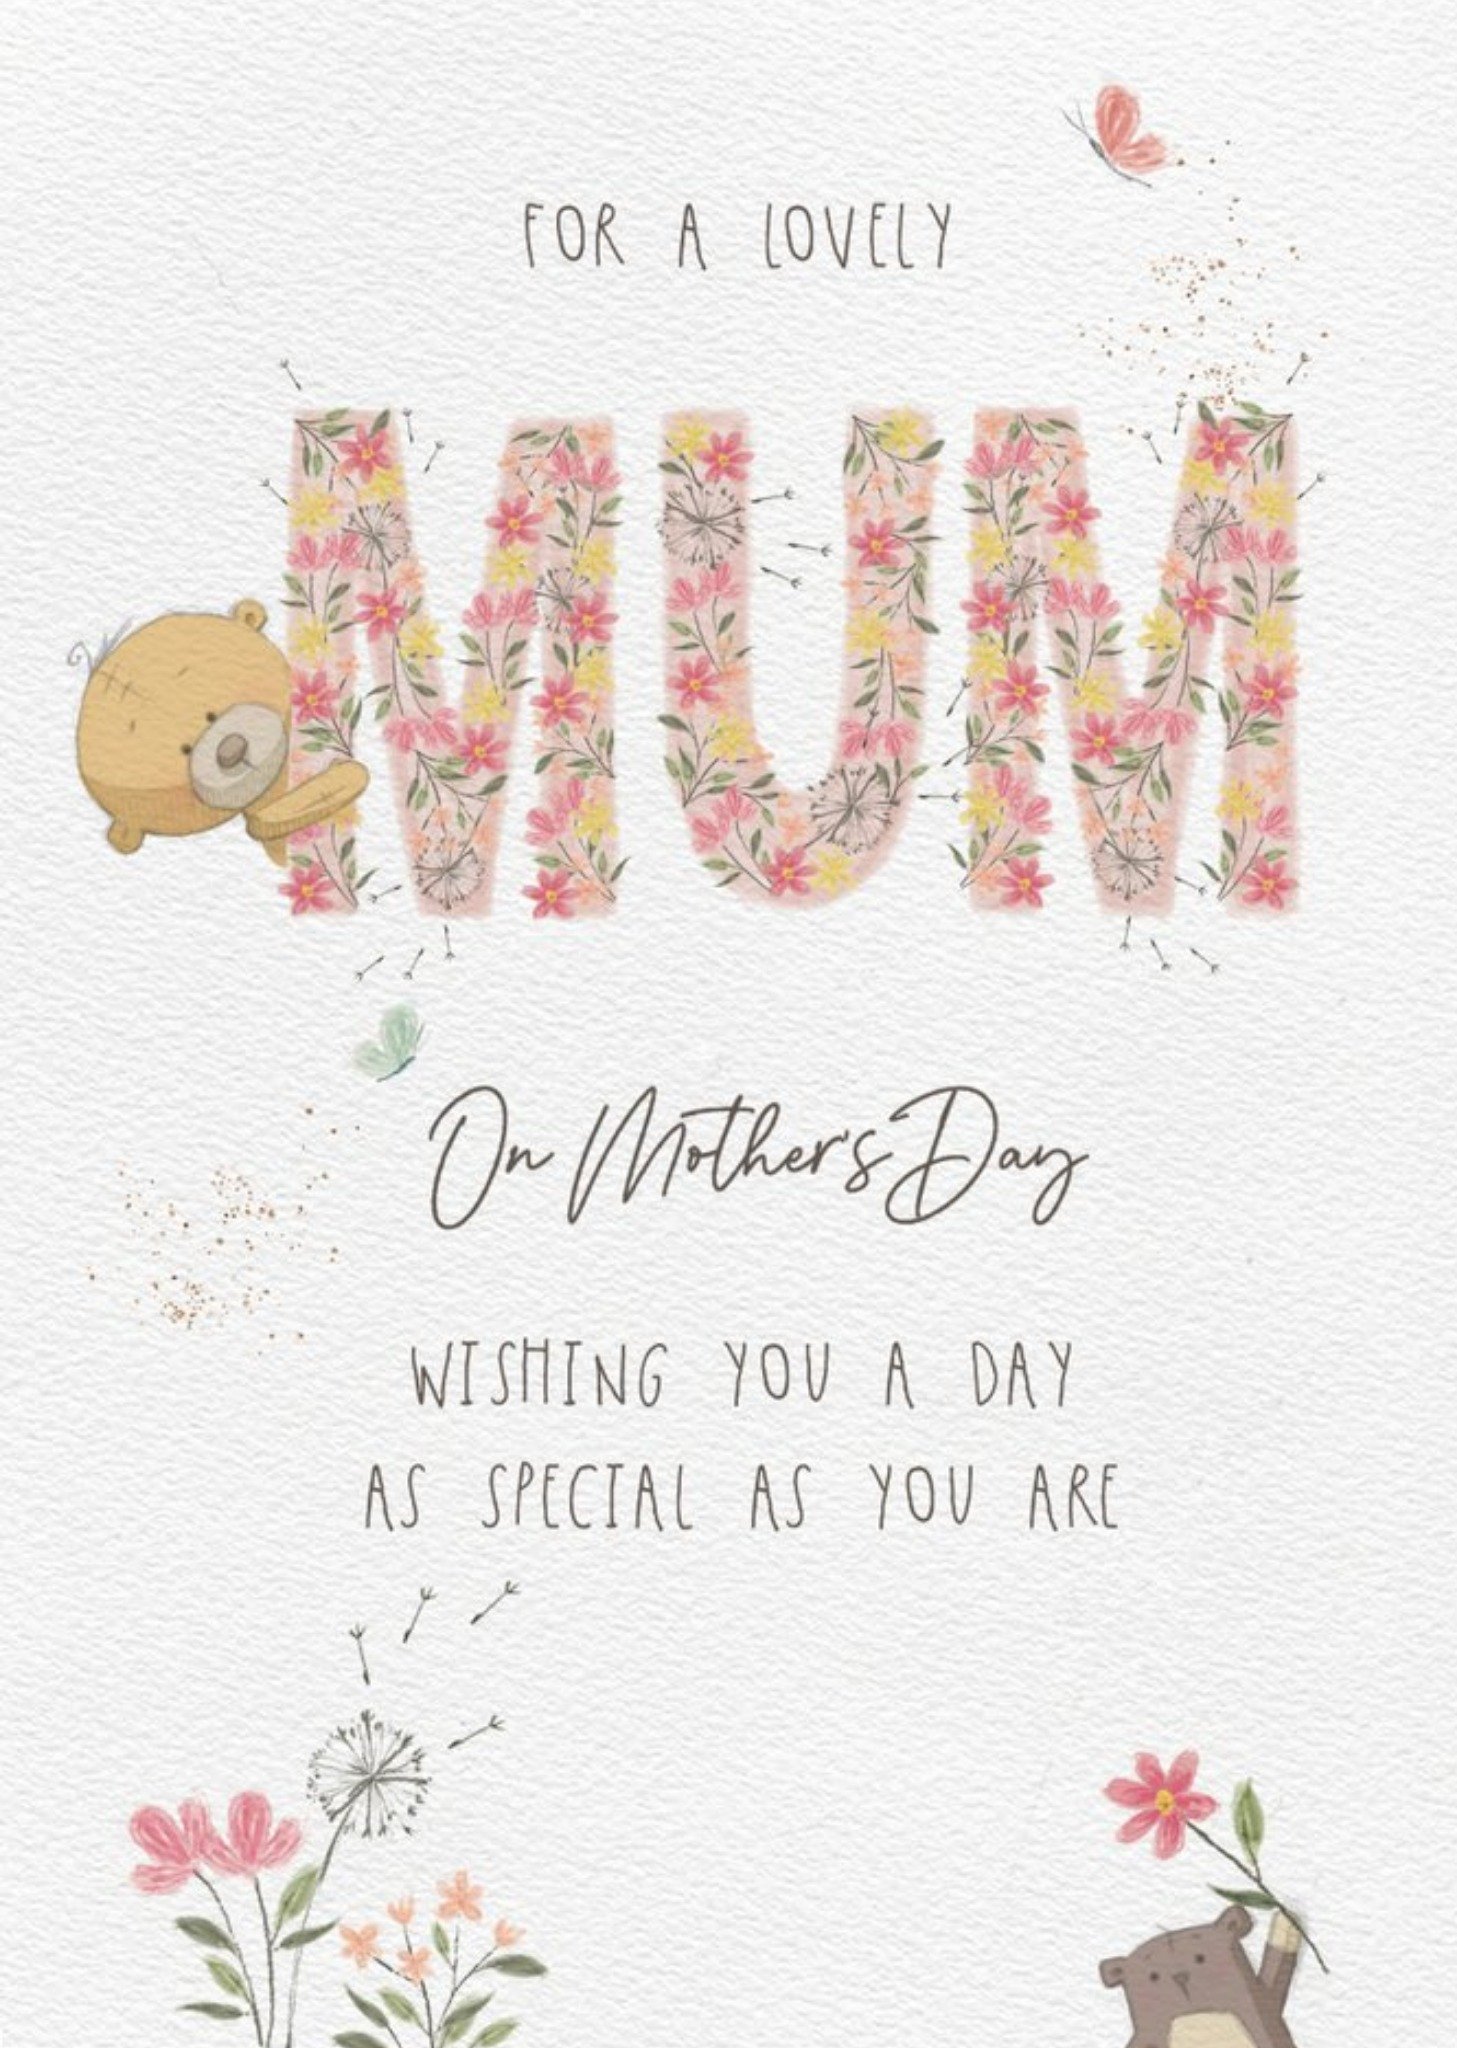 Moonpig Cute Uddle For My Lovely Mum Mother's Day Card Ecard